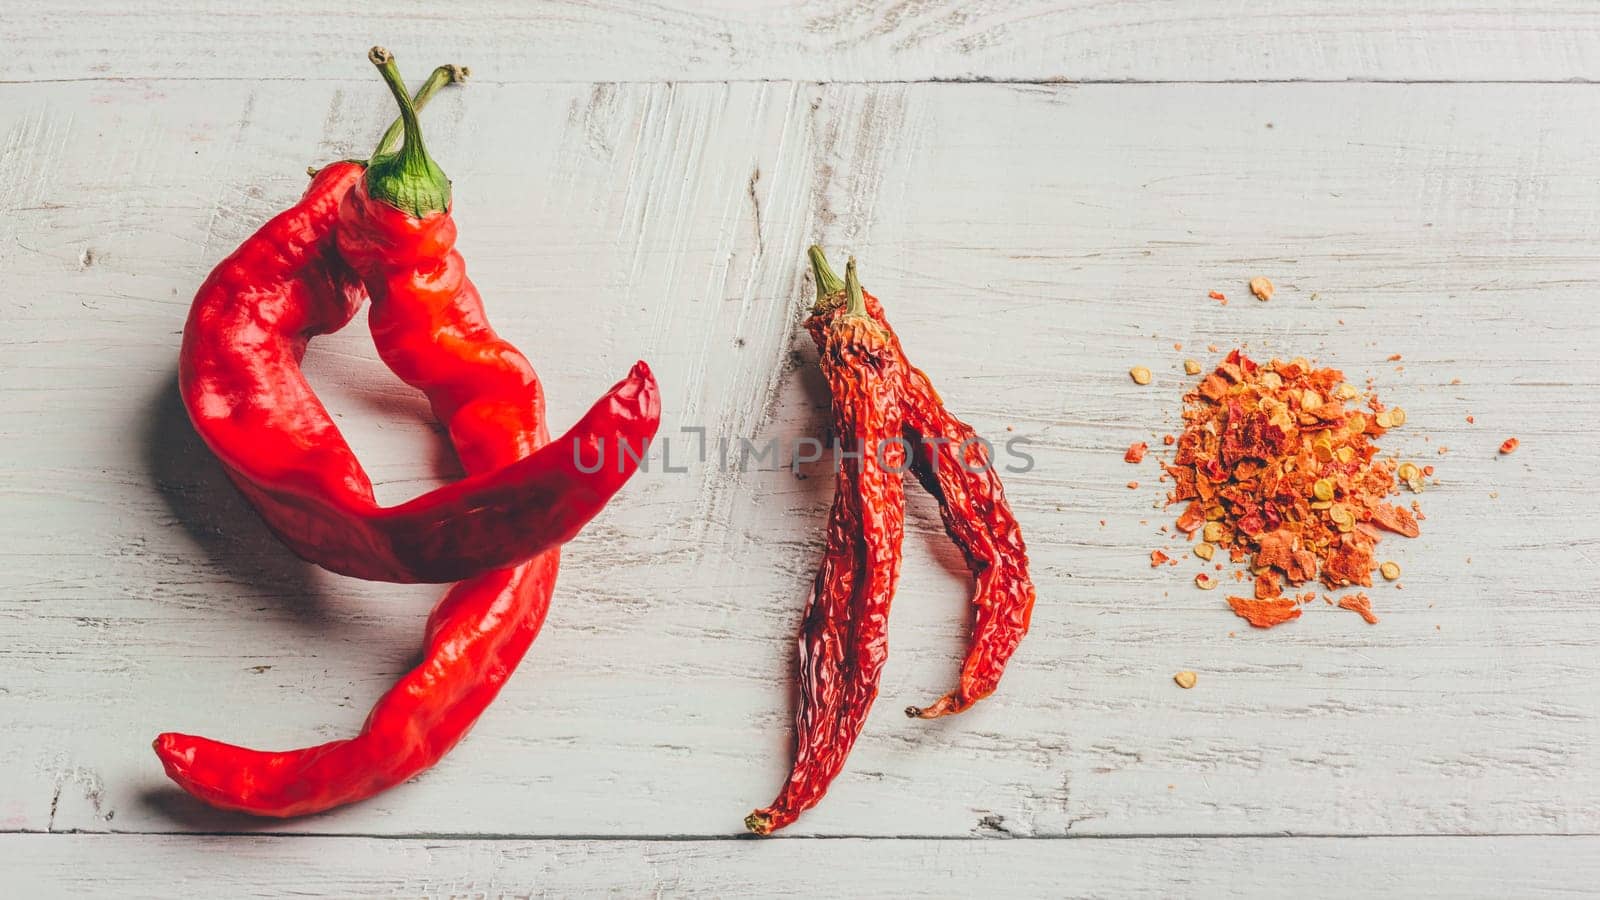 Fresh, dried and crushed red chili pepper by Seva_blsv